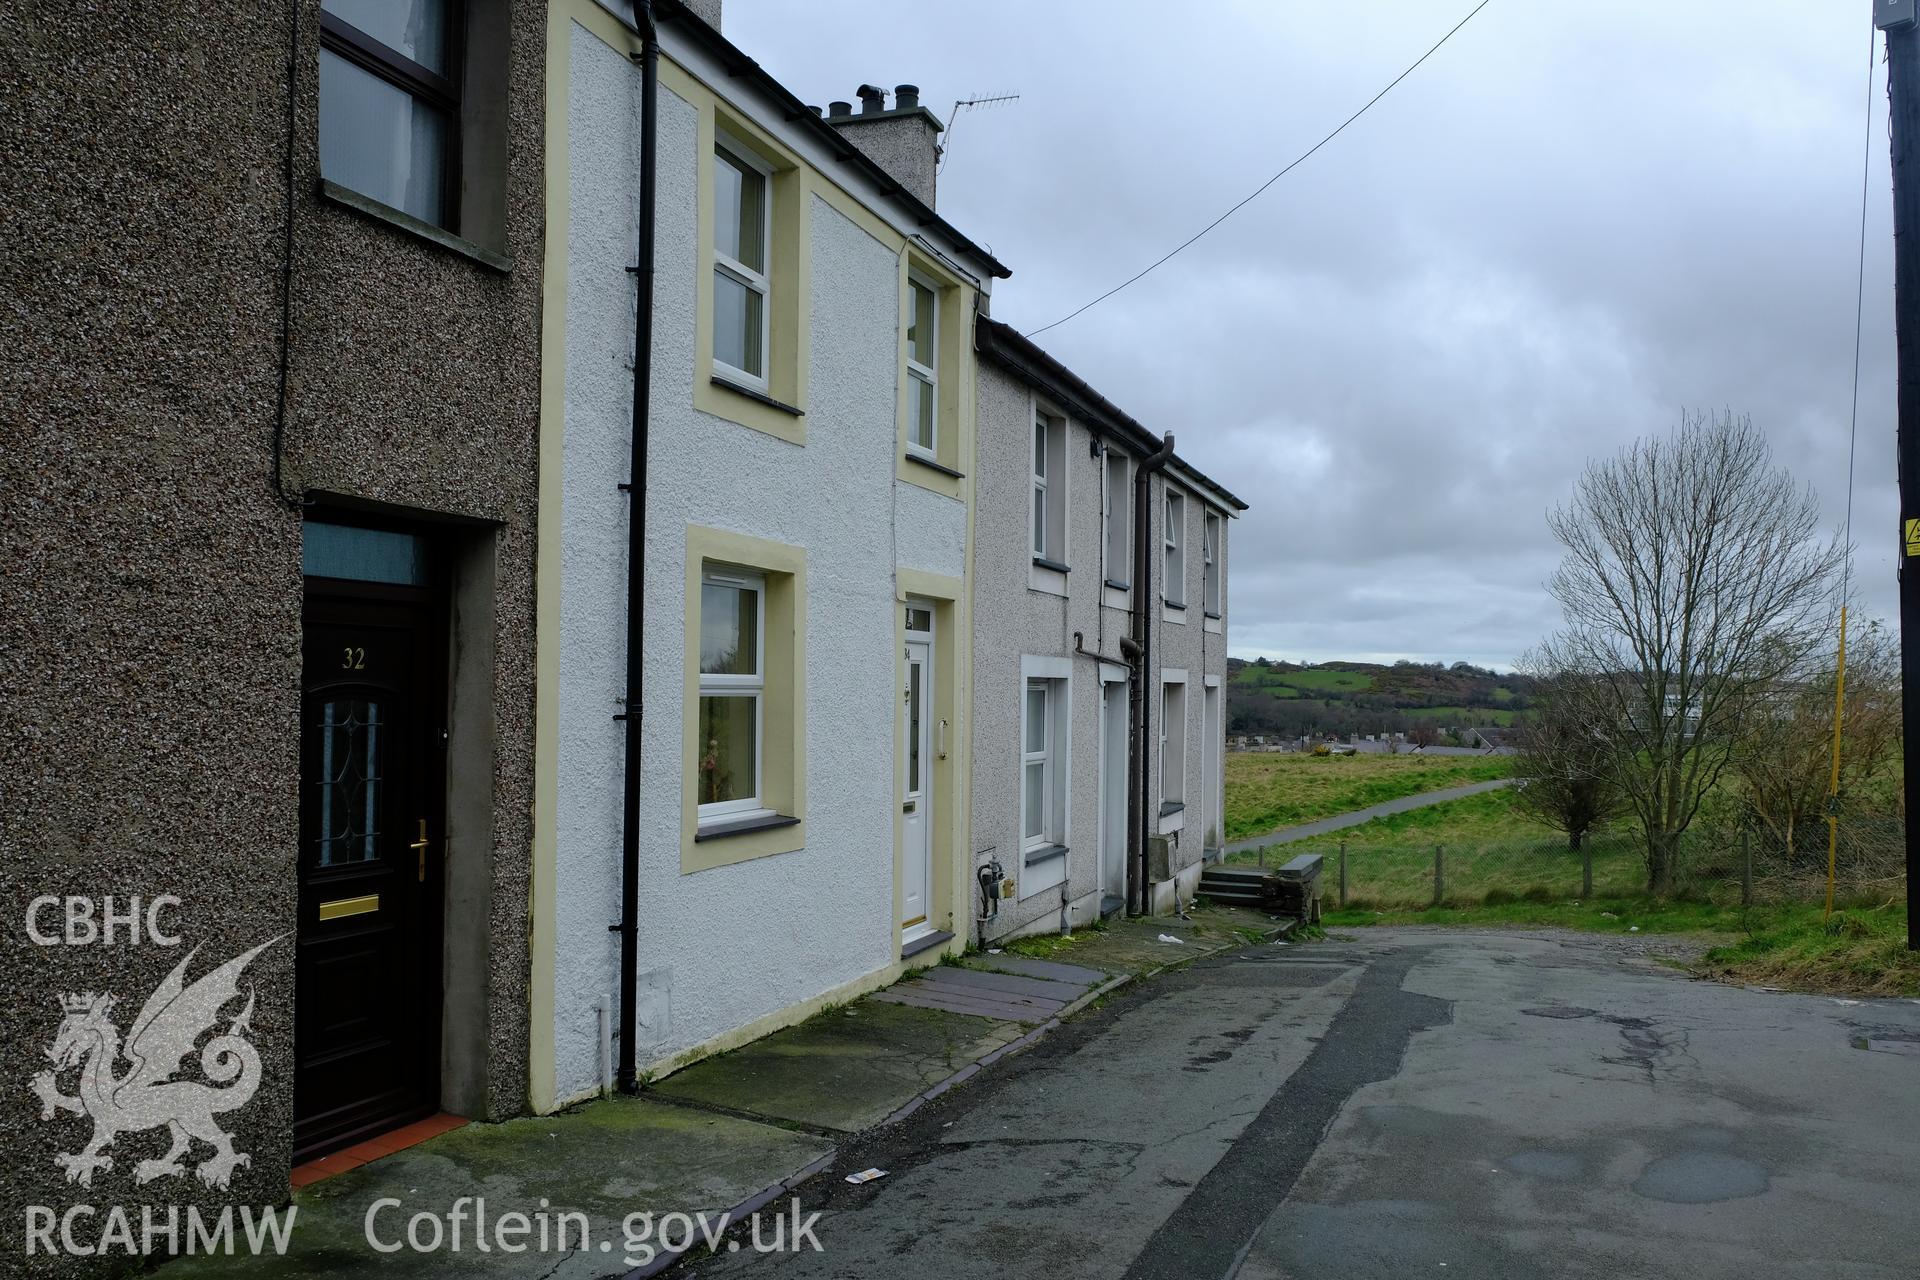 Colour photograph showing view looking west at Cefnfaes Street, Bethesda, produced by Richard Hayman 16th March 2017